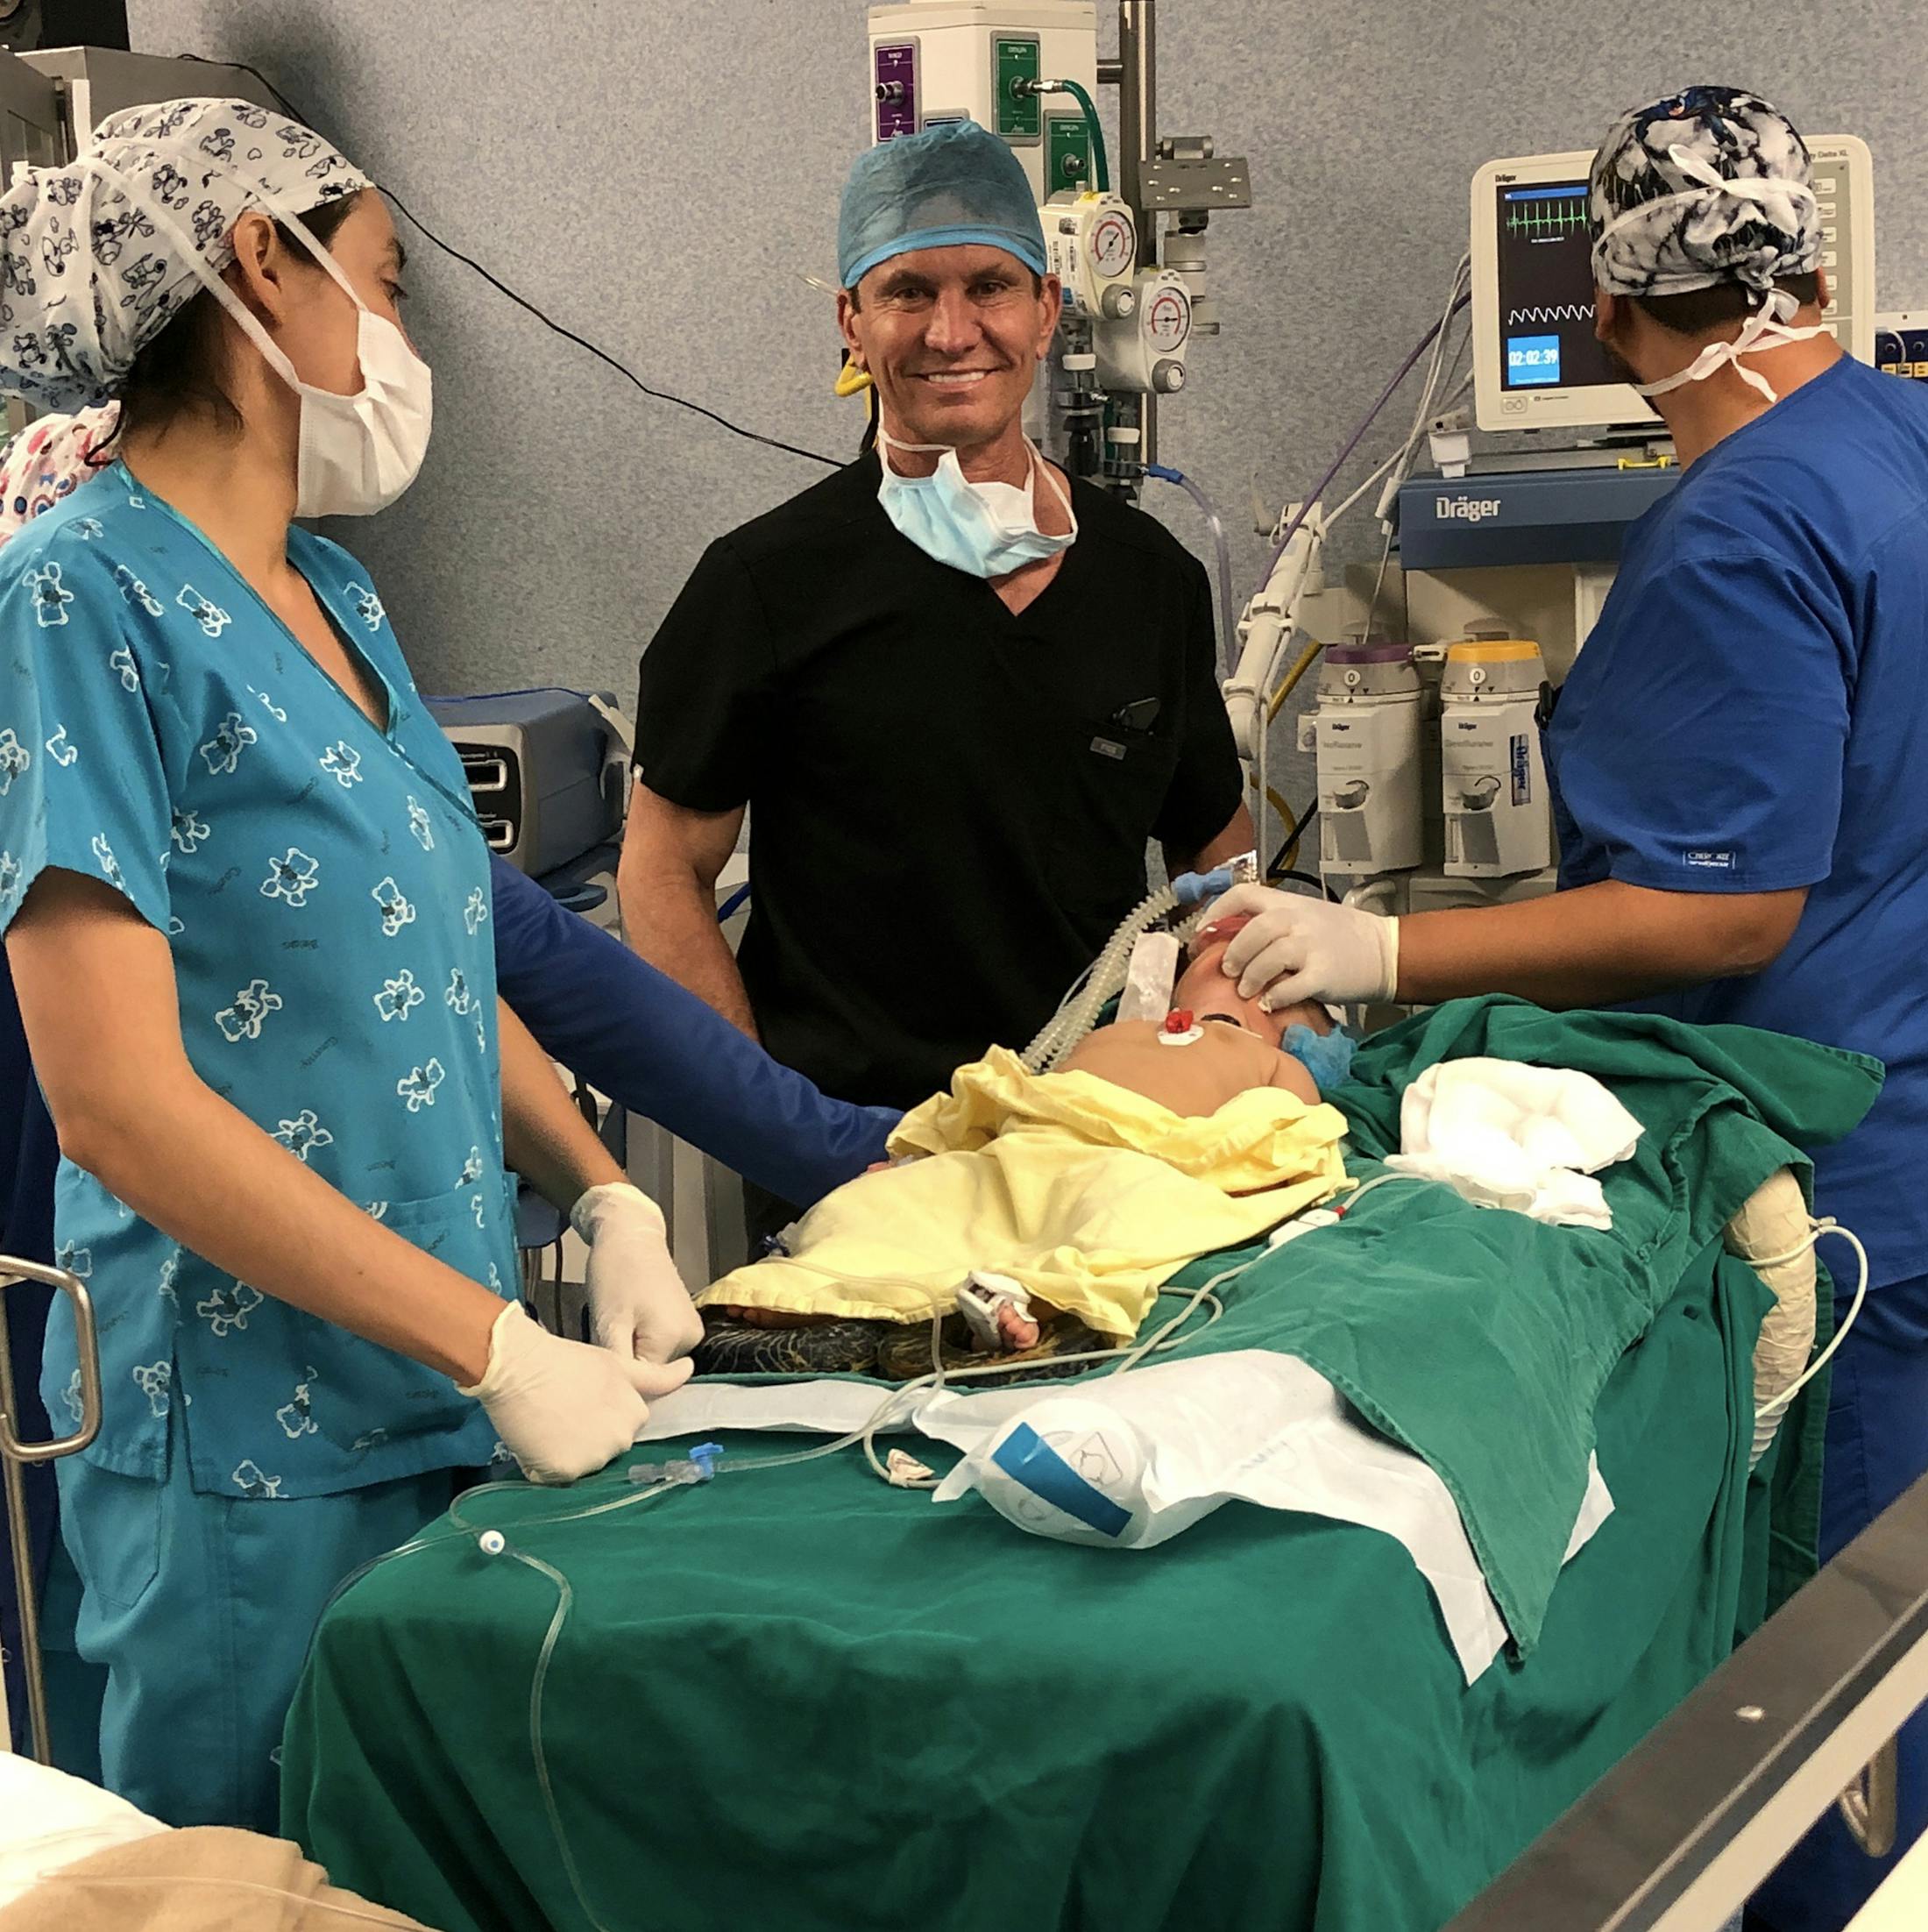 Dr. Shapiro Performing a Procedure on a Baby